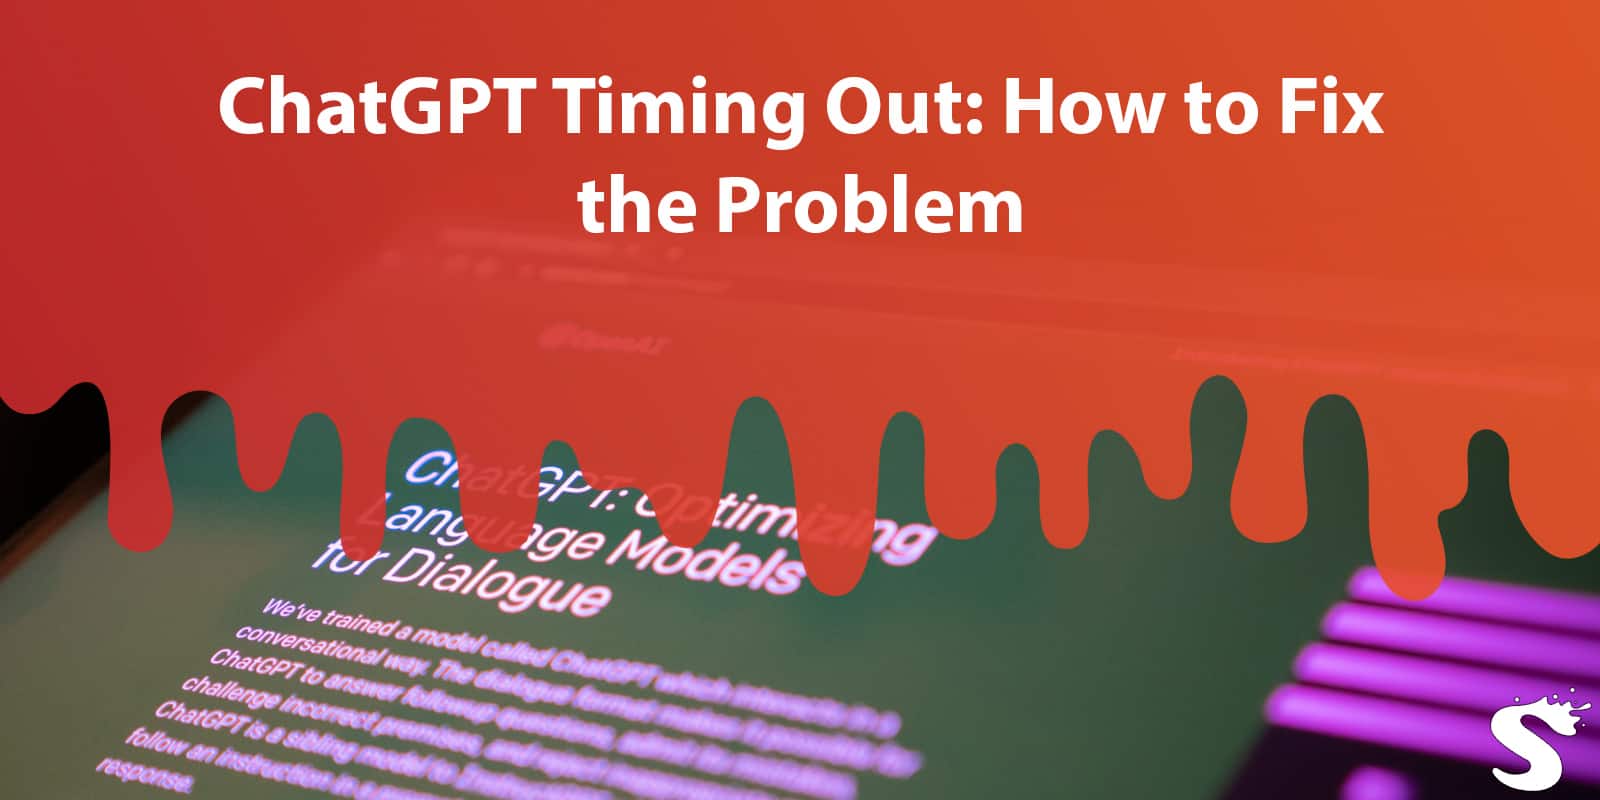 ChatGPT Timing Out: How to Fix the Problem